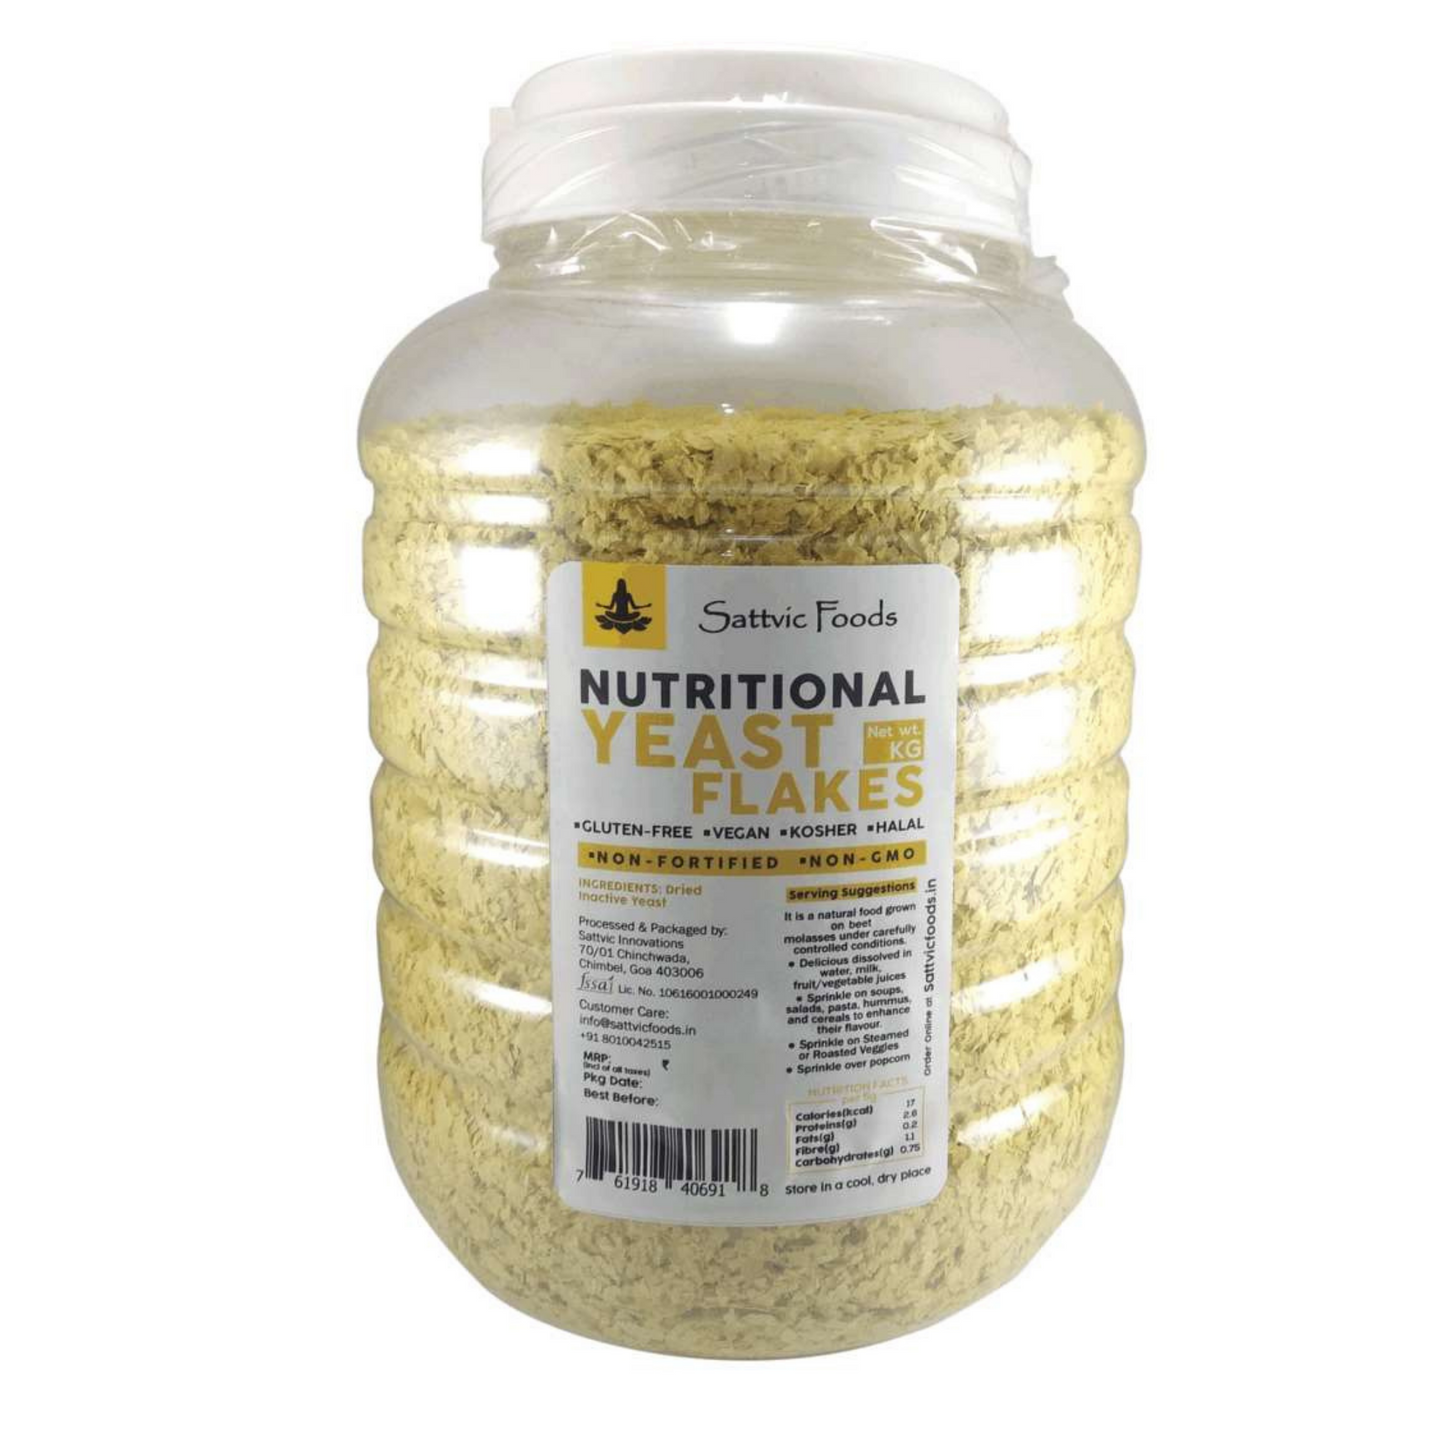 Nutritional Yeast Flakes - Non Fortified, Non GMO, Vegan, Gluten-Free